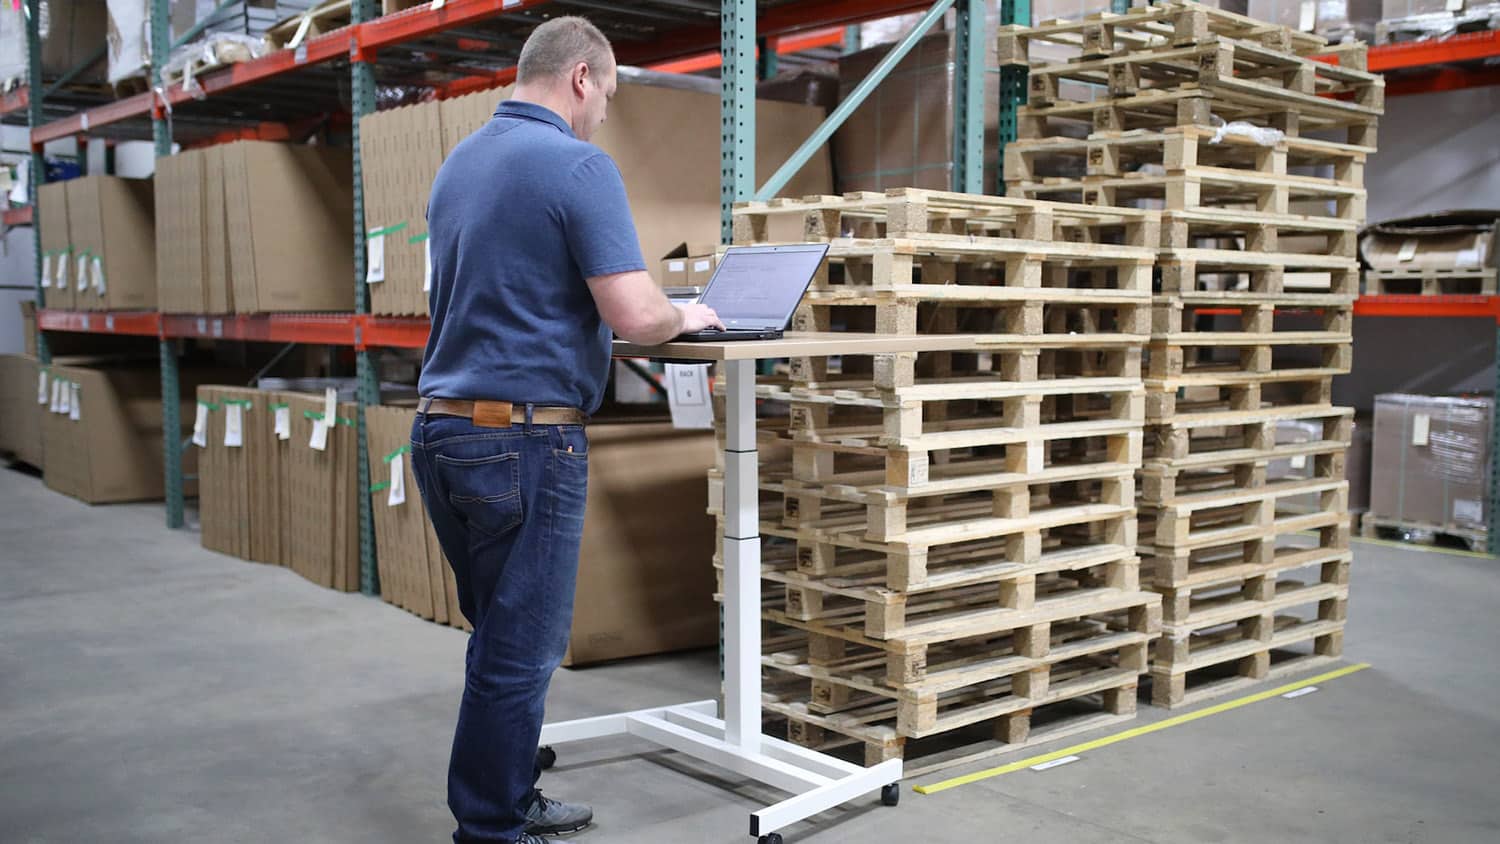 man in a shipping warehouse looks at a laptop computer